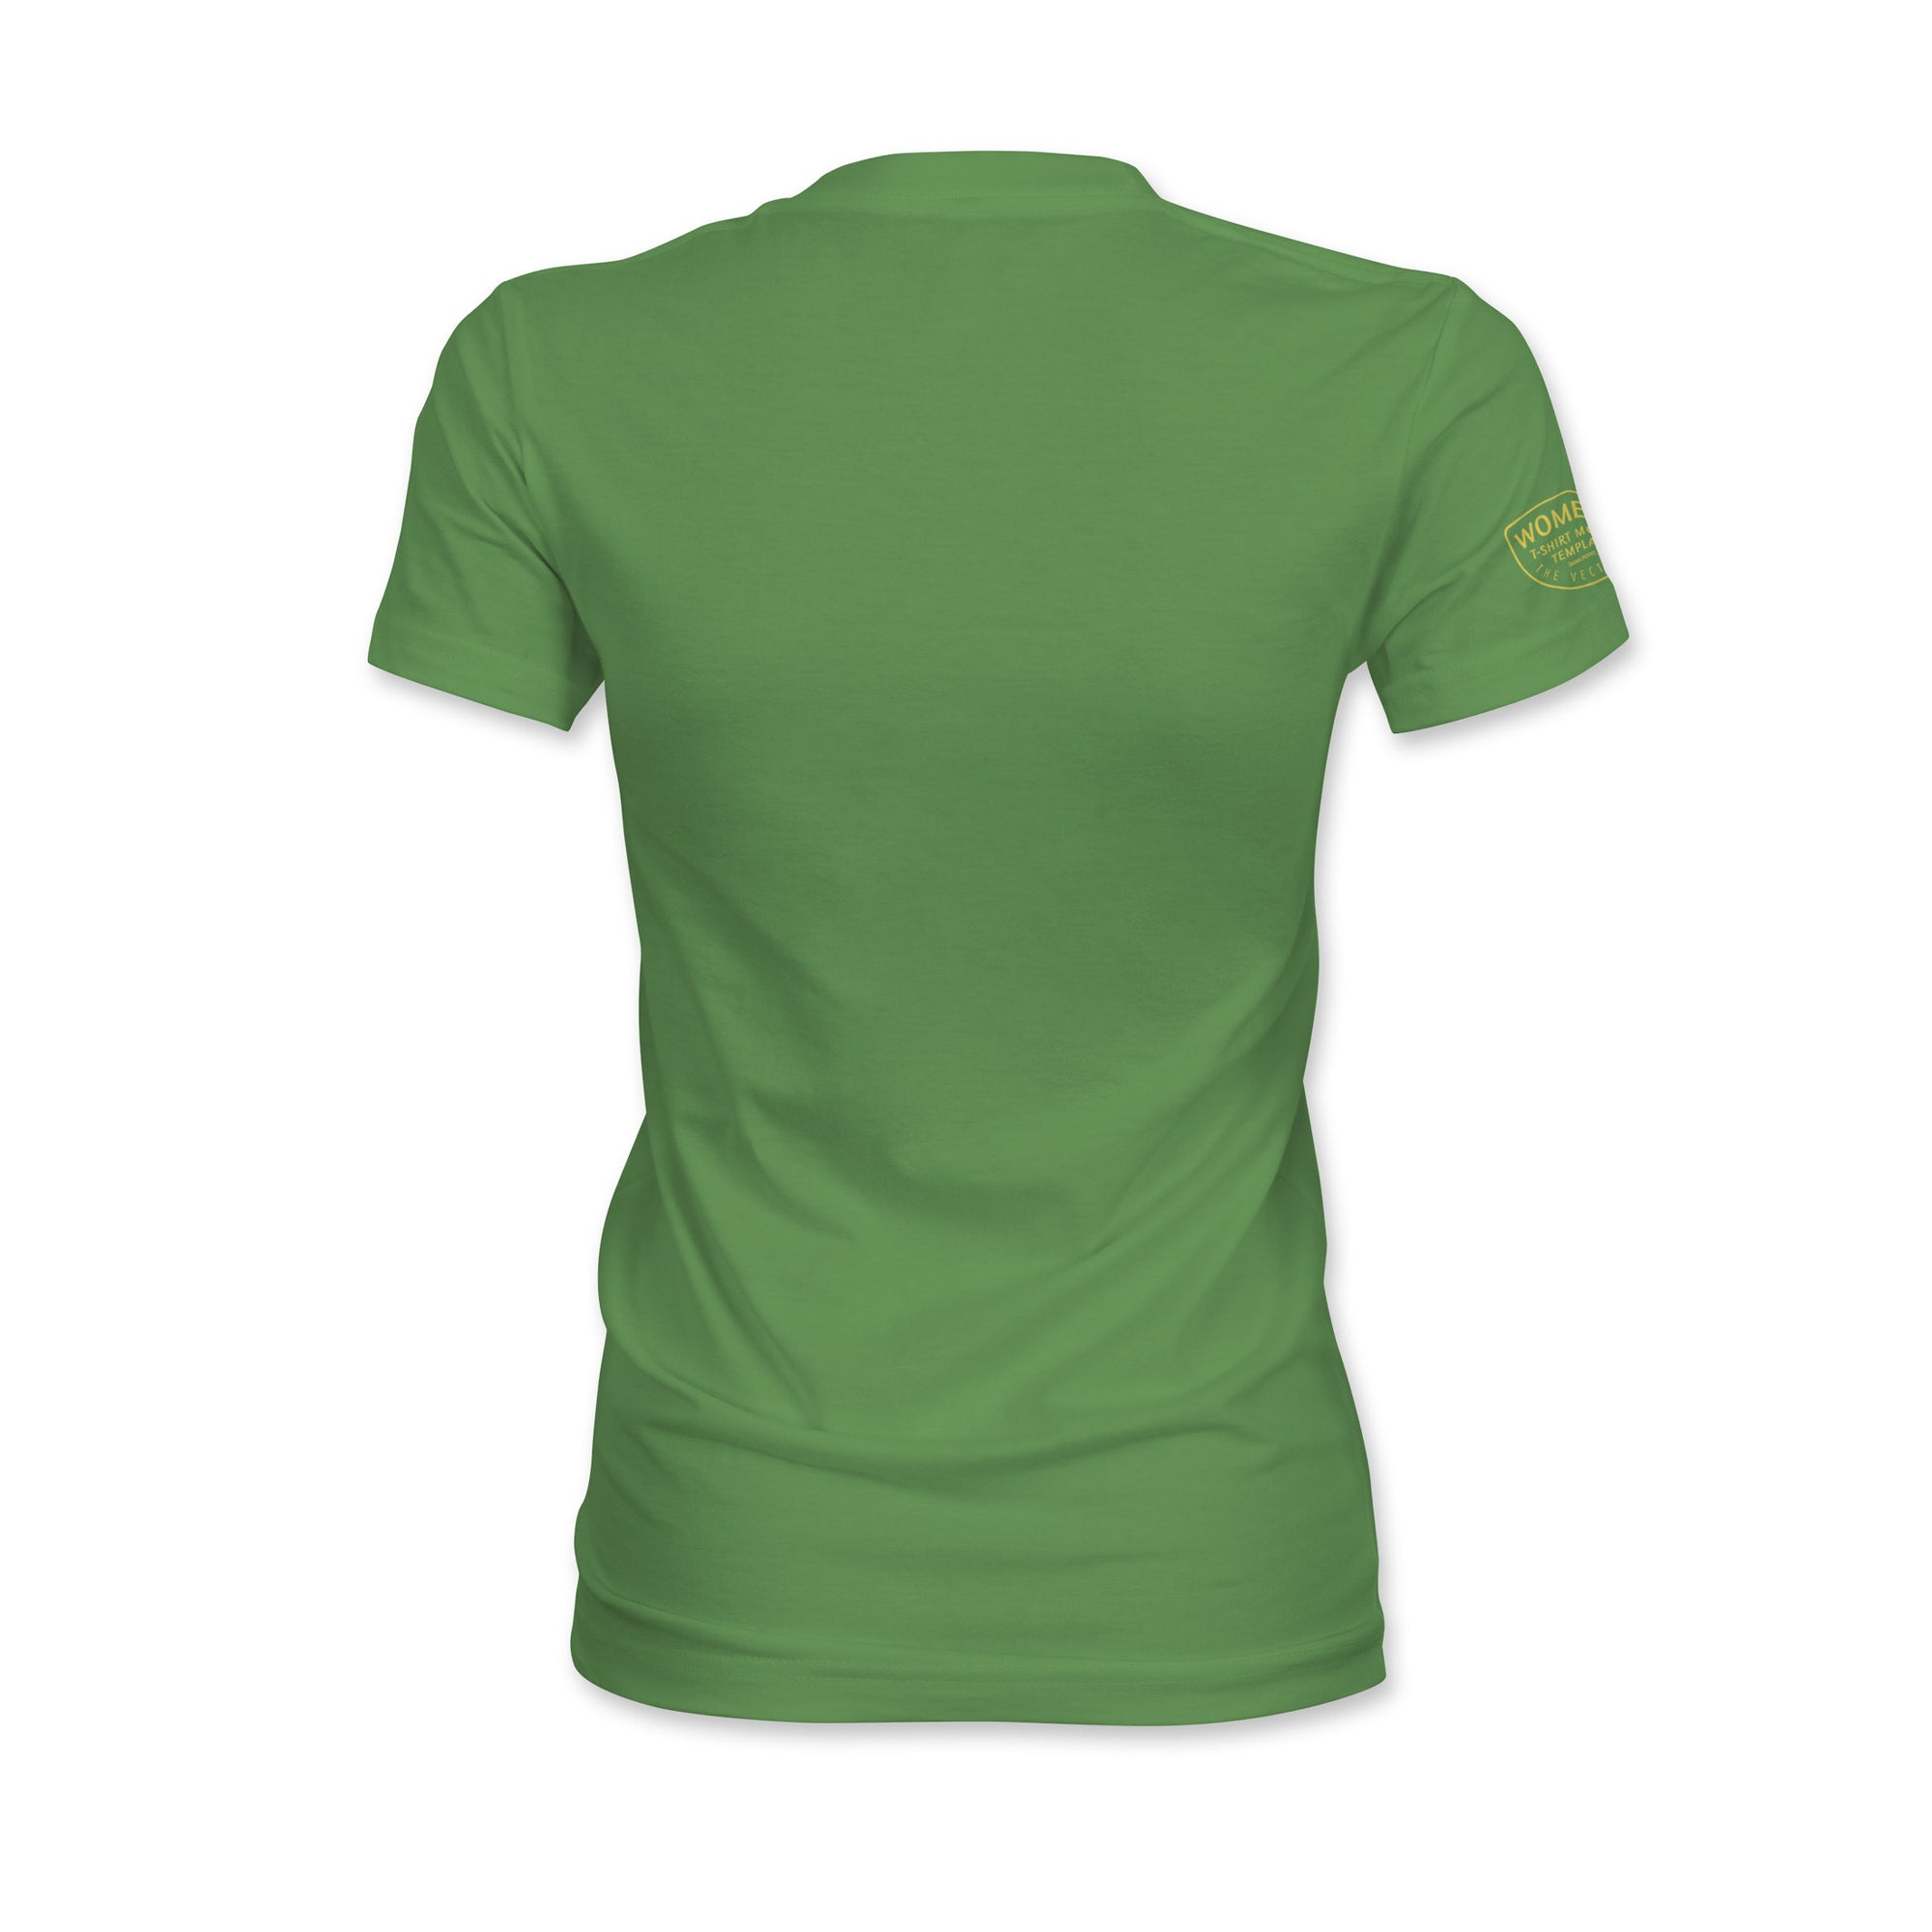 Download Women's T-Shirt Mockup Templates (Version 5.0) - TheVectorLab